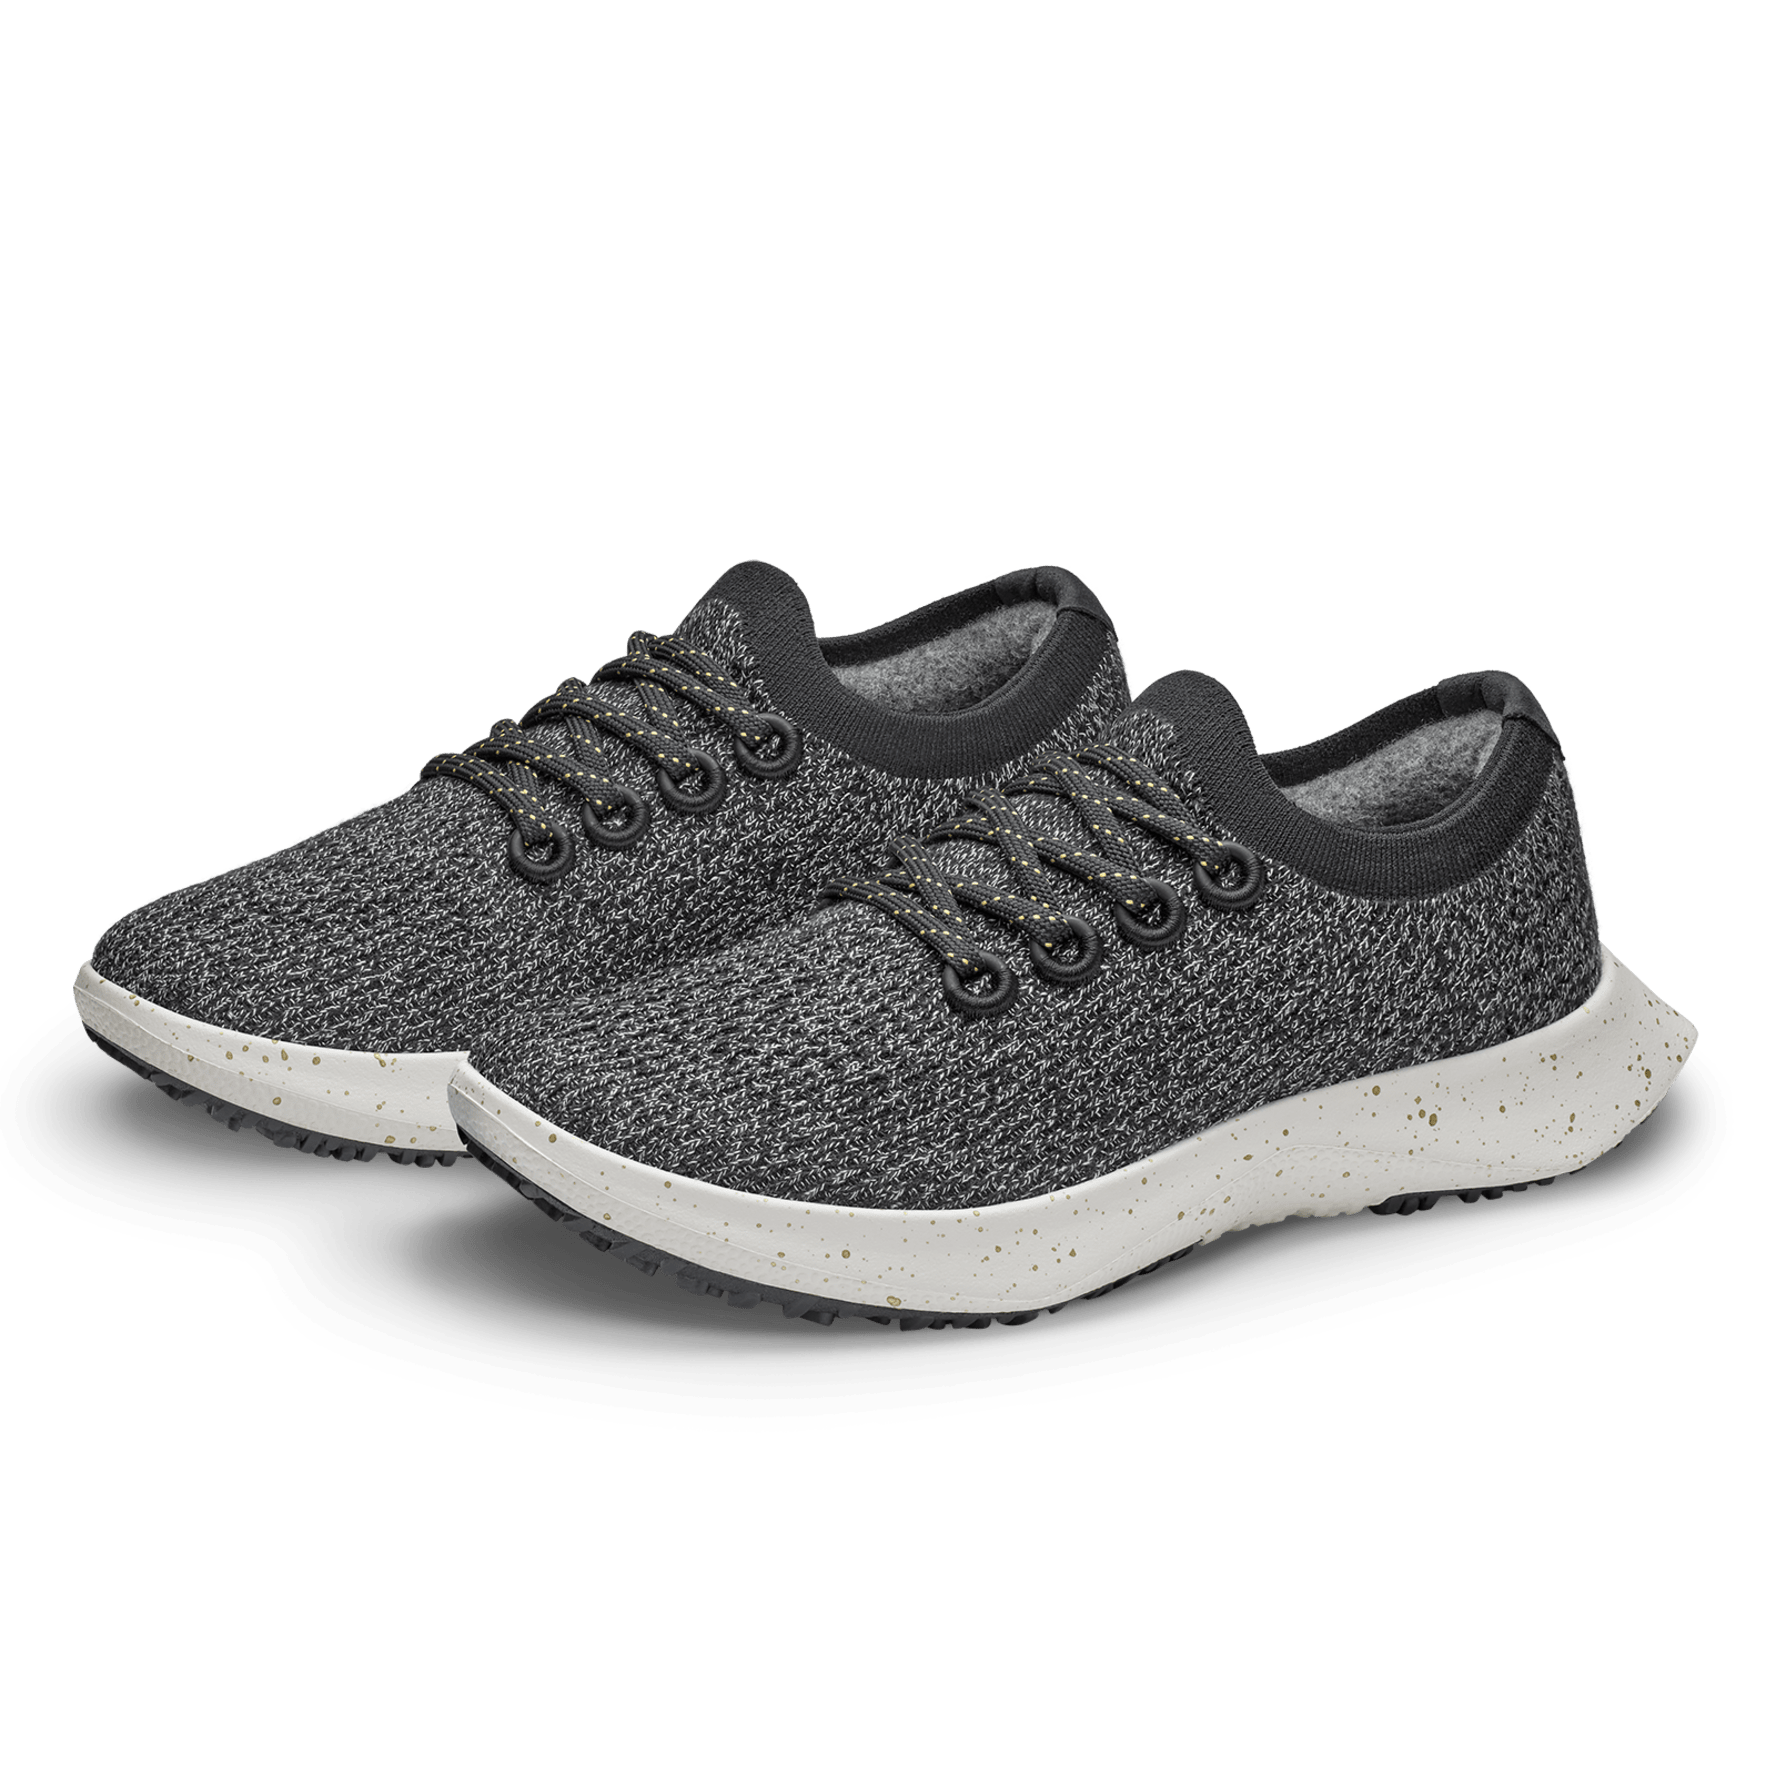 https://cdn.allbirds.com/image/fetch/q_auto,f_auto/w_1776,f_auto,q_auto/https://www.allbirds.com/cdn/shop/products/Active-Tree_Dasher_2-Earthly_Elements-Pair-Global-Womens-Tree-Natural_Black-Blizzard-Blizzard.png?v=1707181643